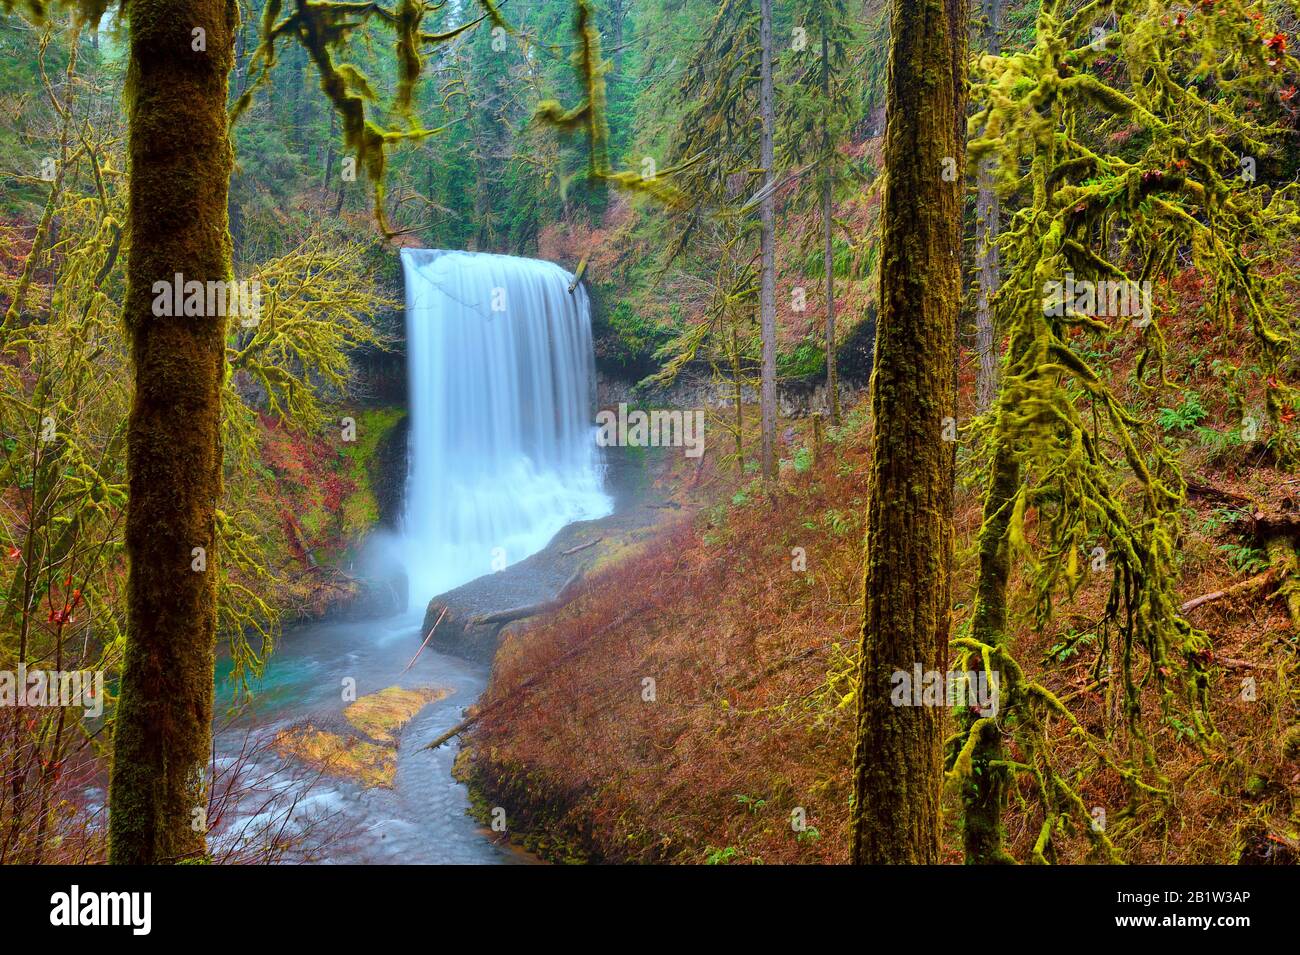 One of several waterfalls at Silverfalls State park surrounded by autumn colored forest. Stock Photo